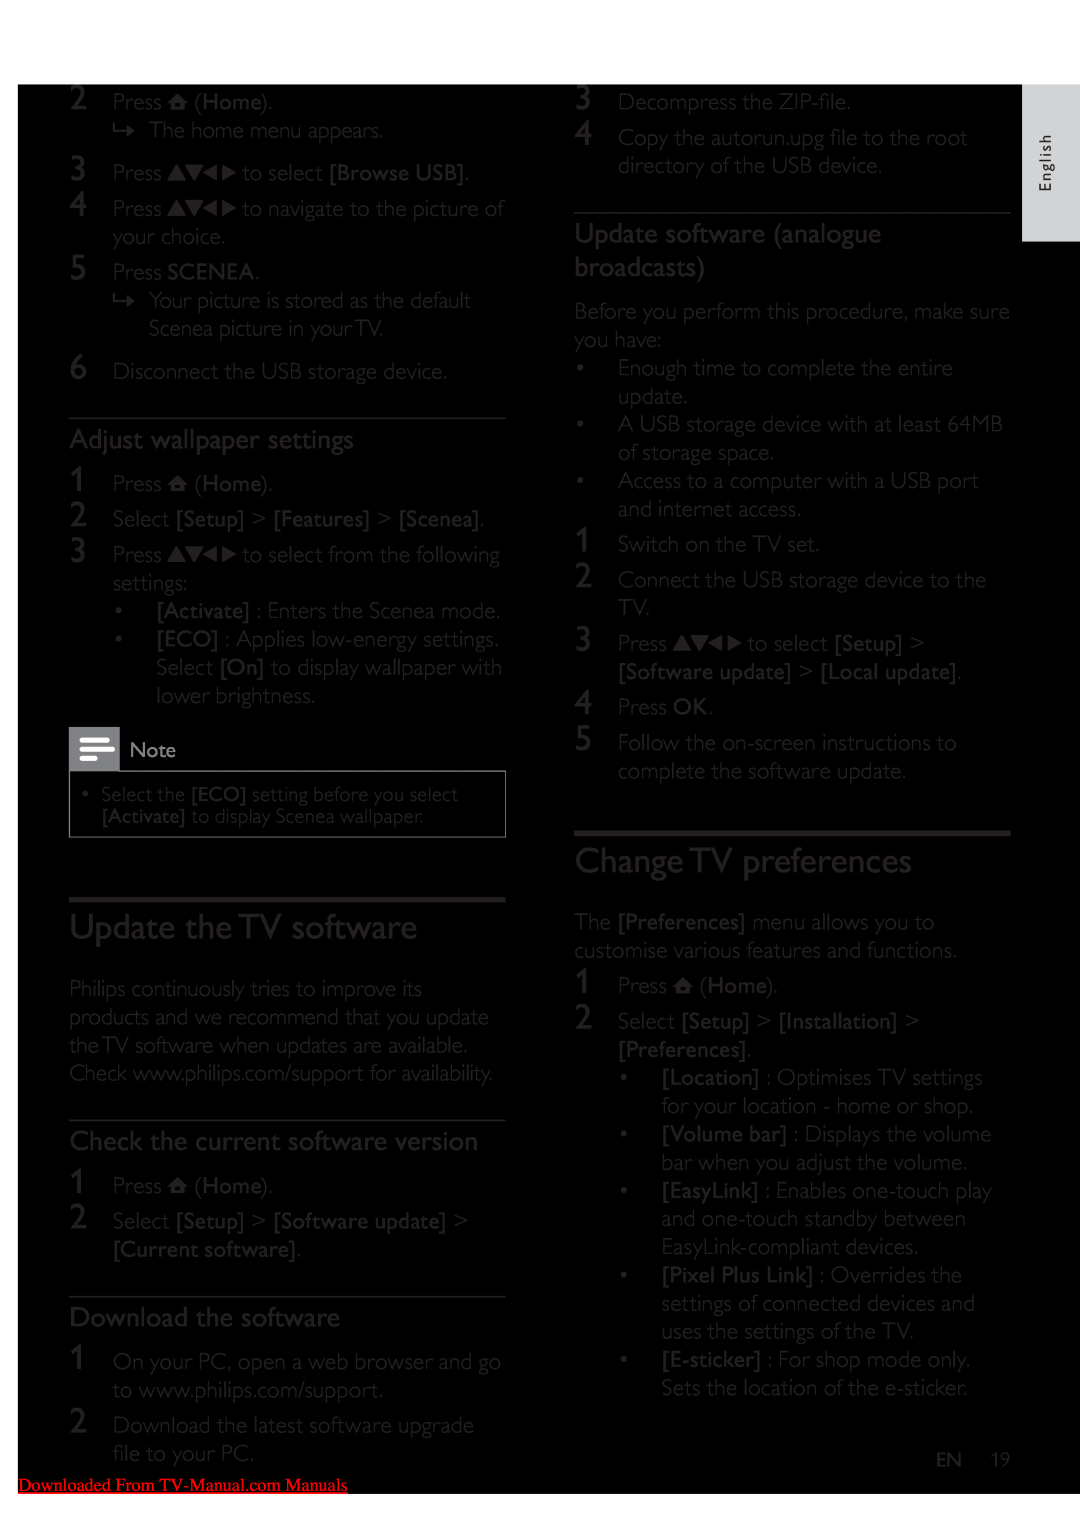 Philips 32PFL5605S/98 Update the TV software, Change TV preferences, Adjust wallpaper settings, Download the software 